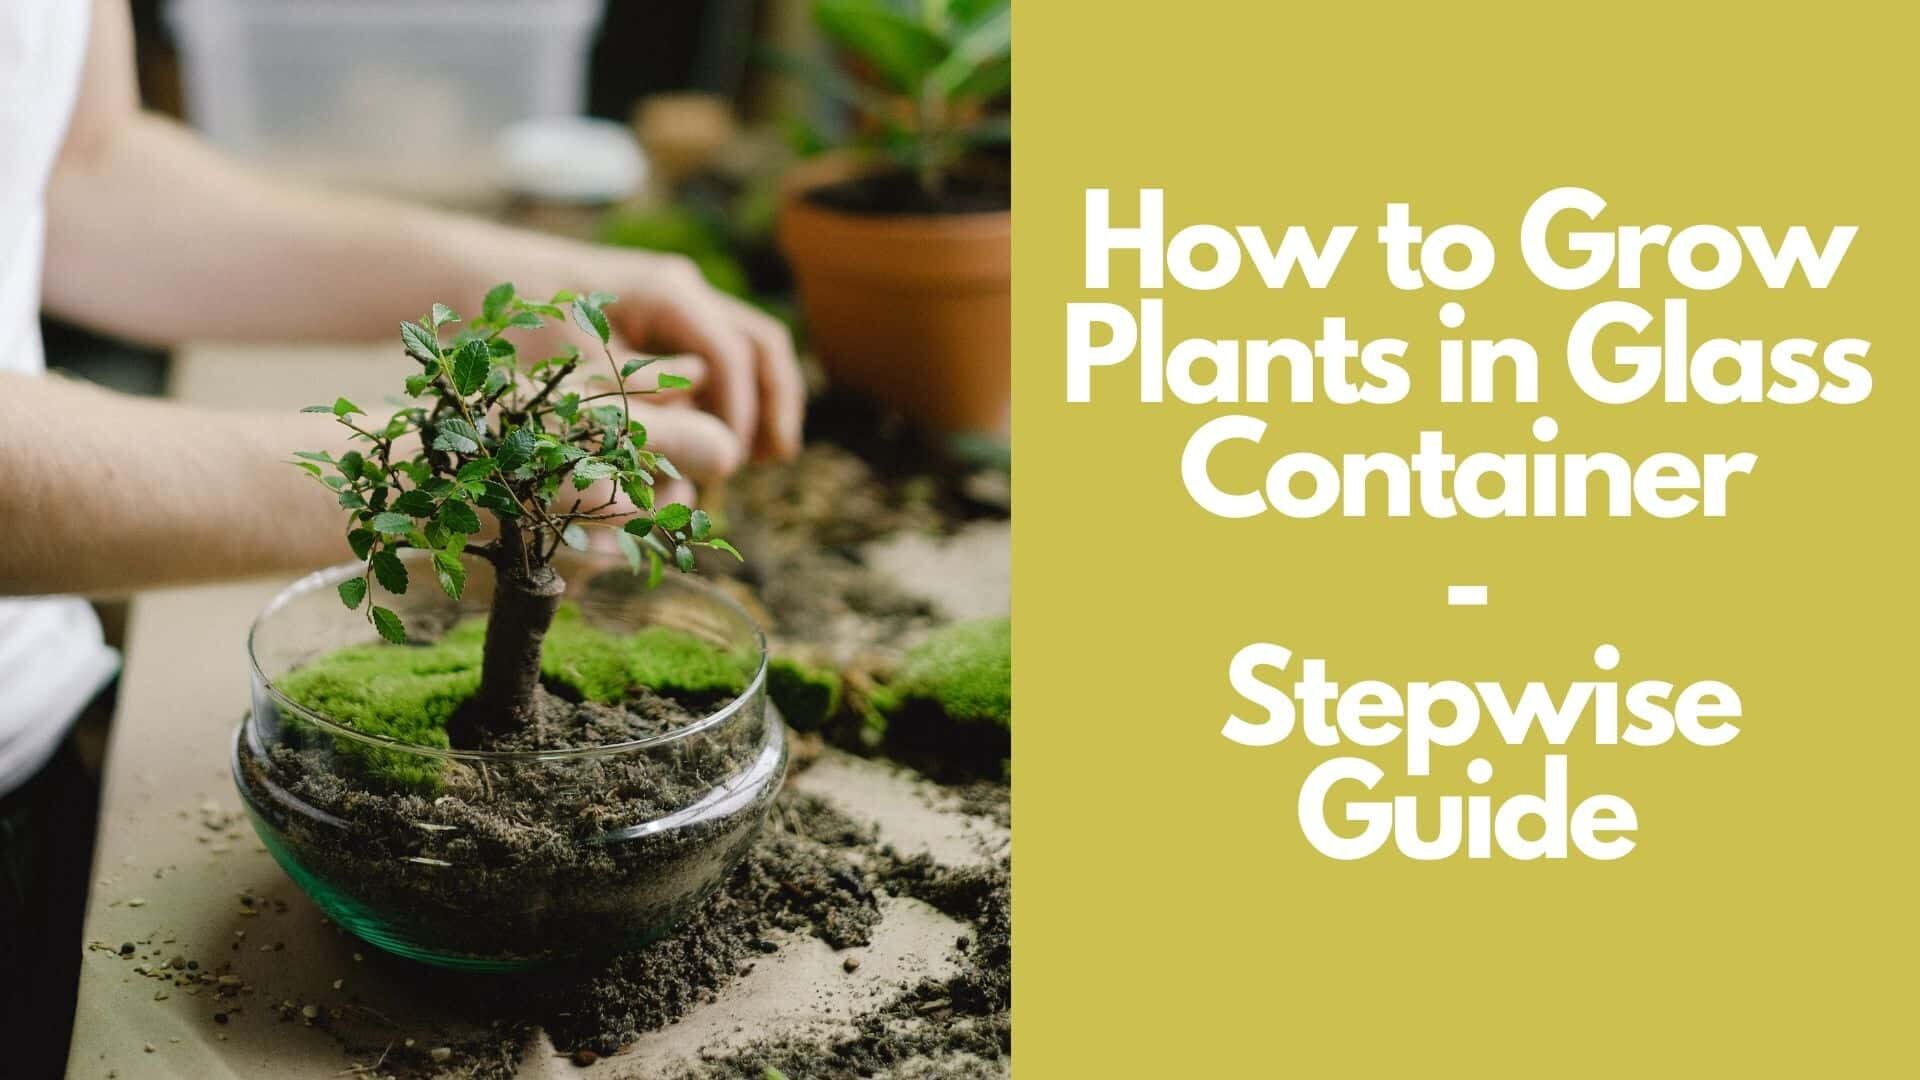 How to Grow Plants in Glass Container: Stepwise Guide